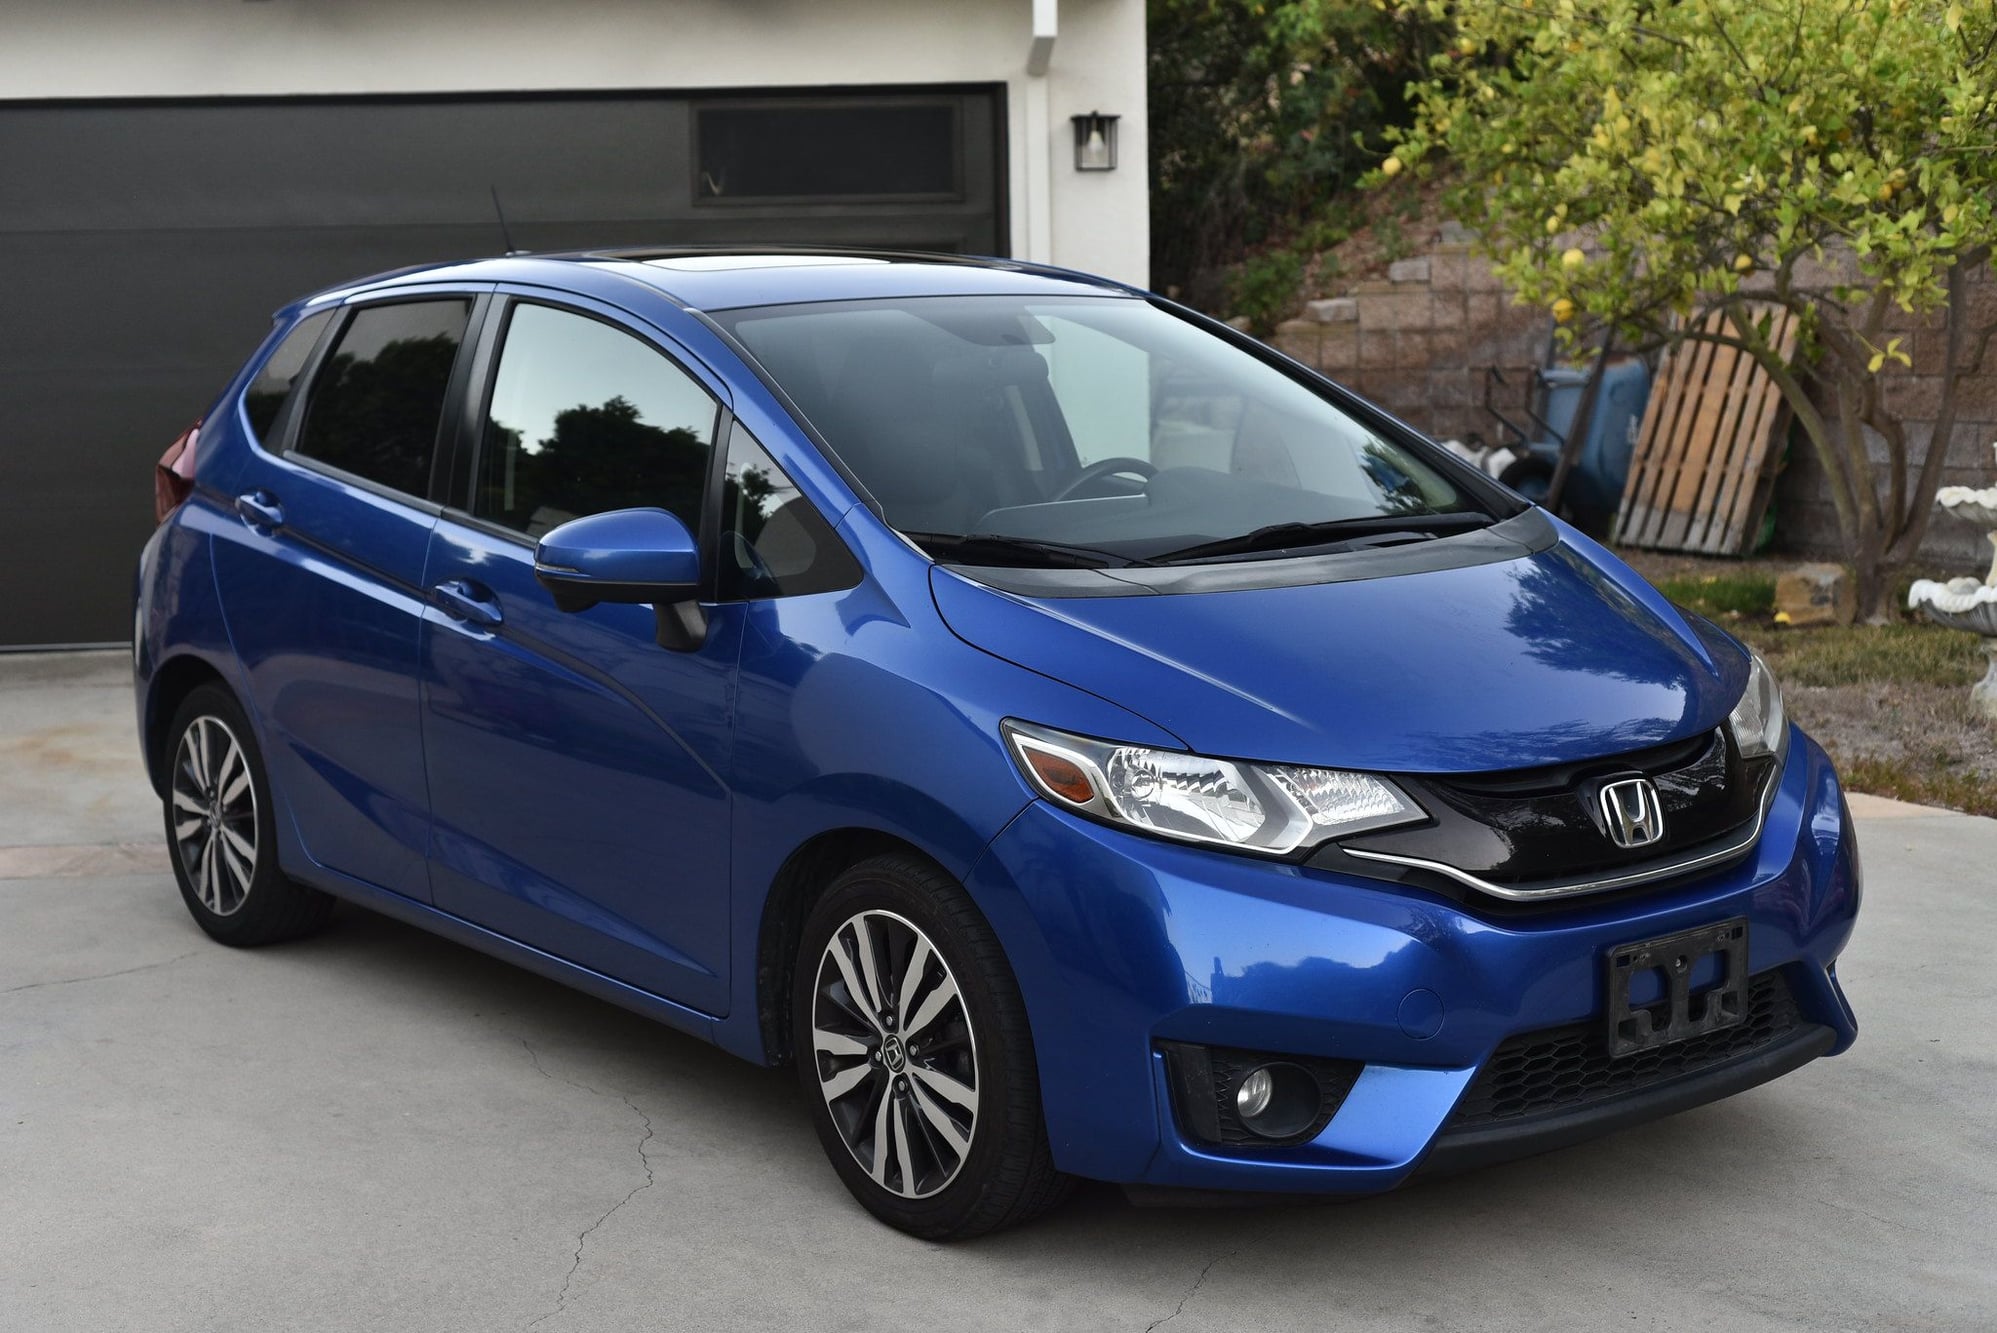 2015 Honda Fit - 2015 Honda Fit EX-LN | 2nd Owner | Great Condition | Los Angeles - Used - VIN 3HGGK5H8XFM747676 - 107,700 Miles - 4 cyl - 2WD - Automatic - Hatchback - Blue - Rancho Palos Verdes, CA 90275, United States